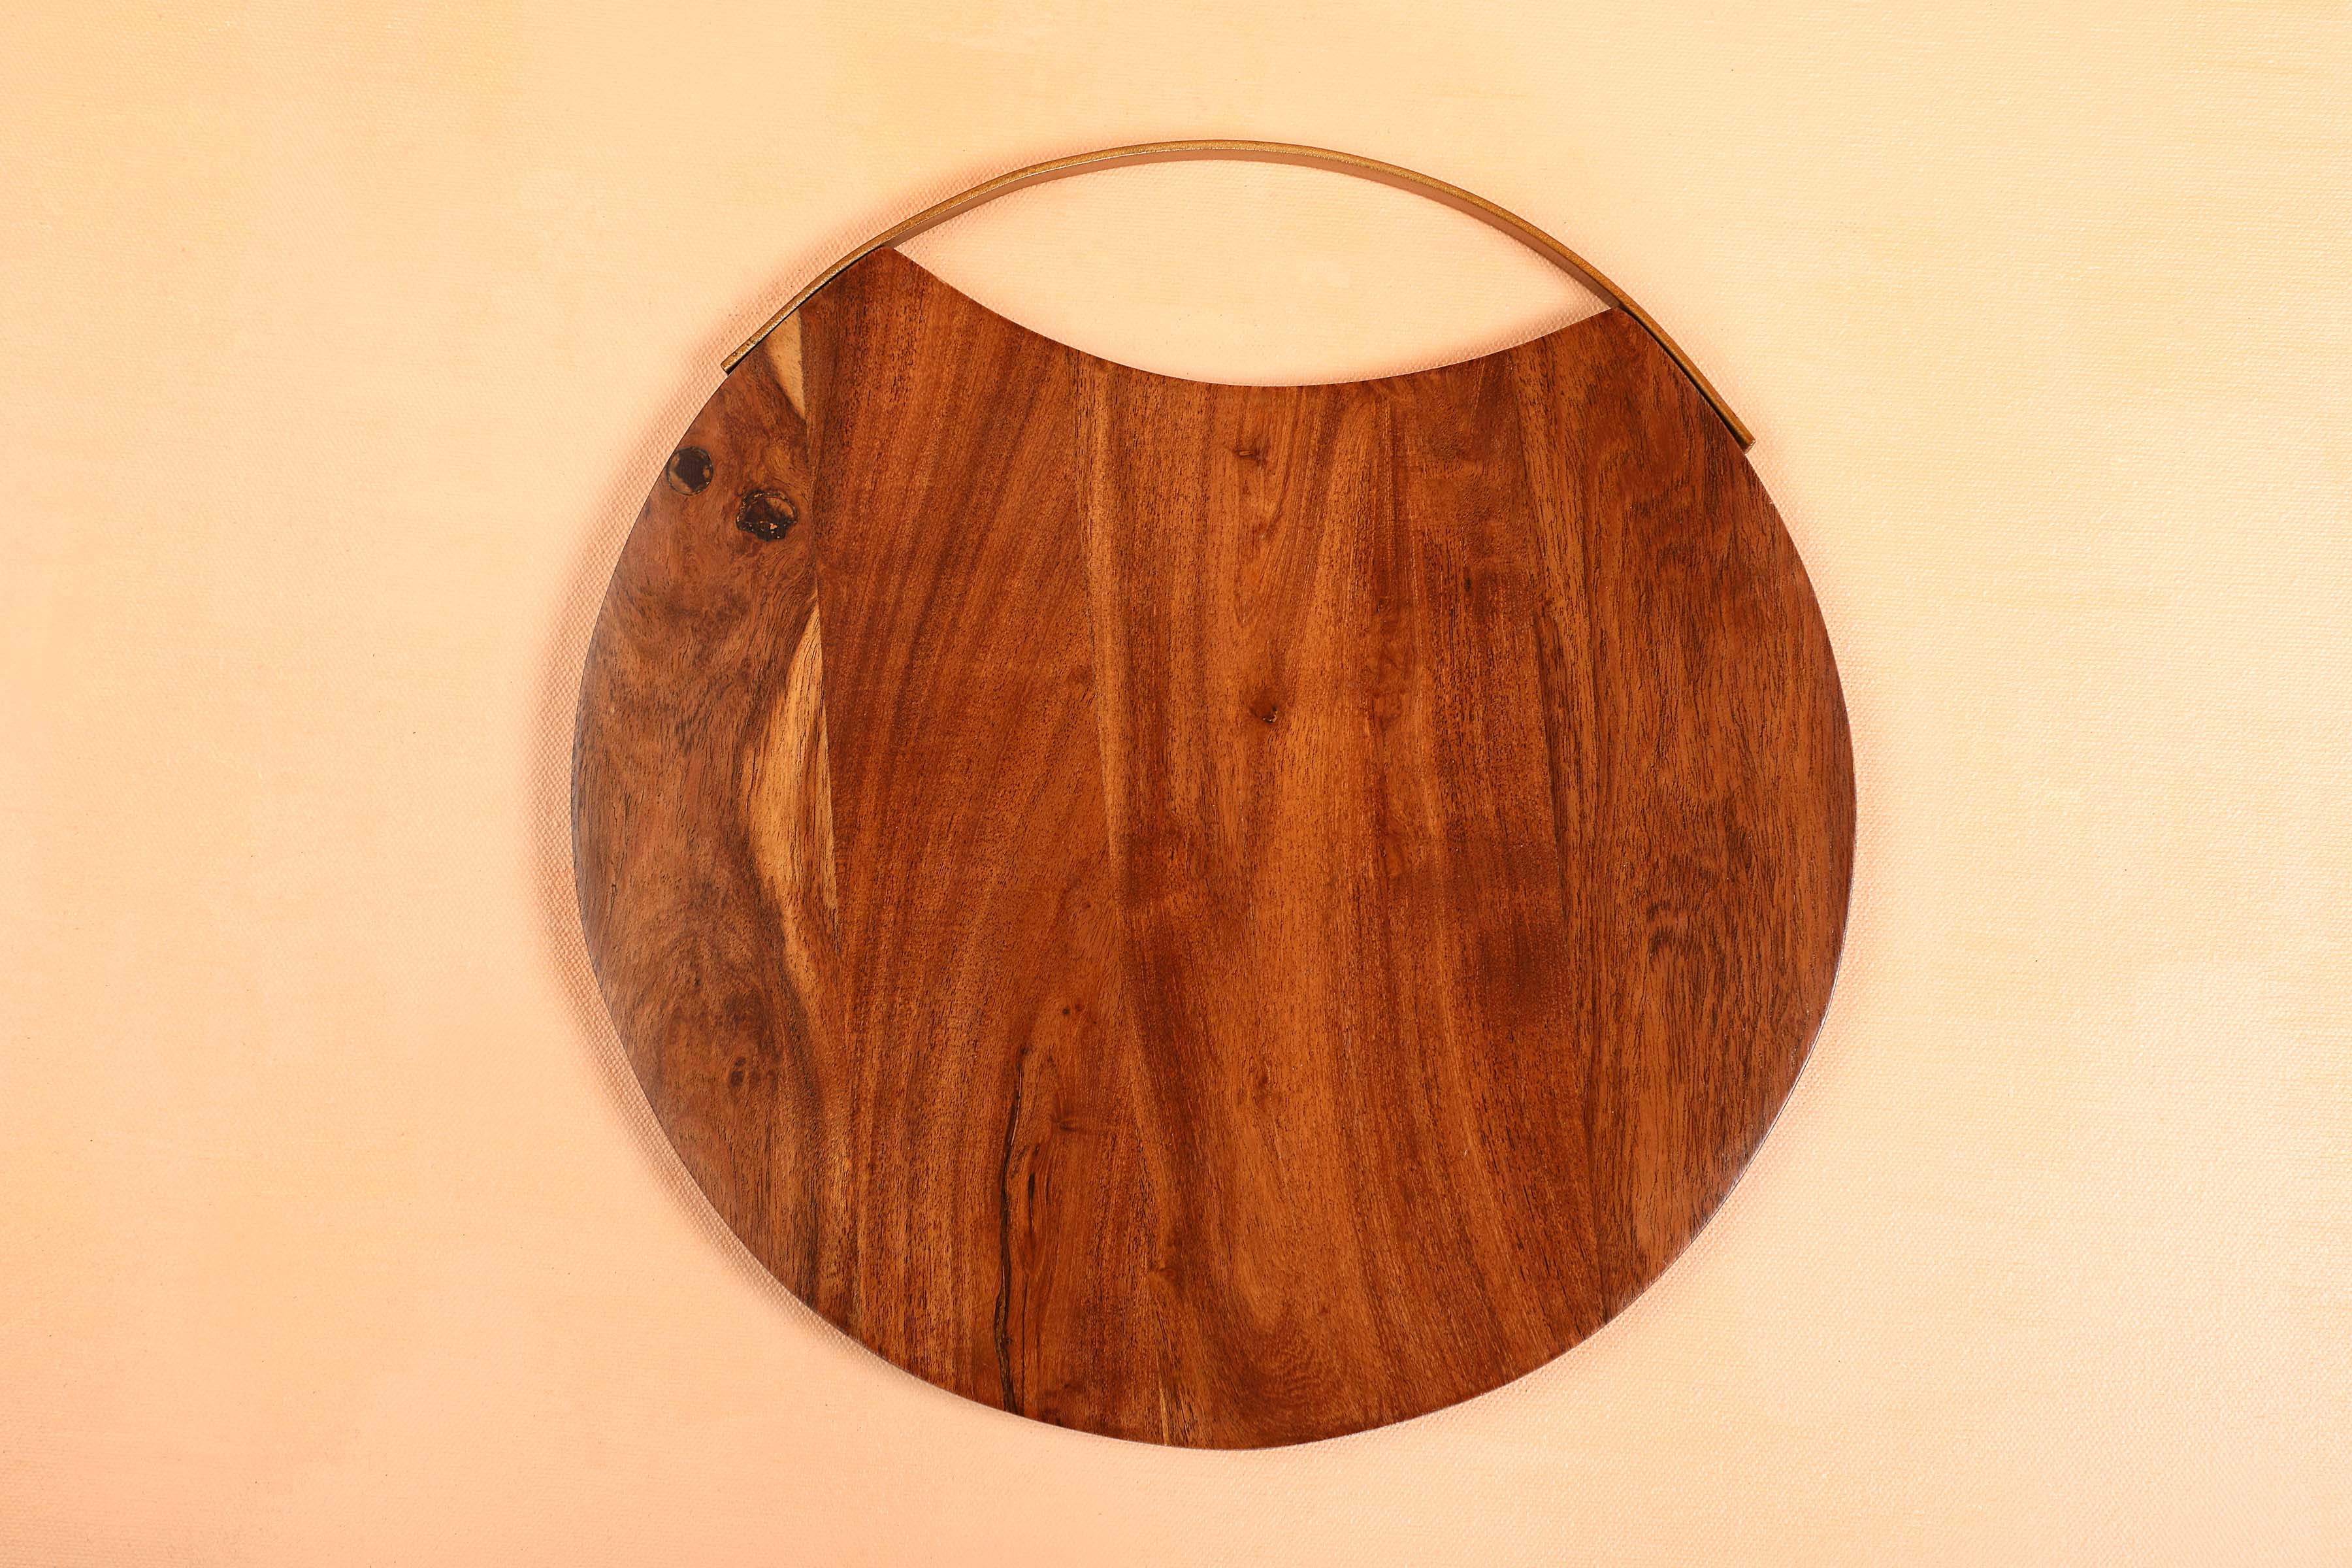 Handmade Wood Charcuterie Board - Round -  12 inches